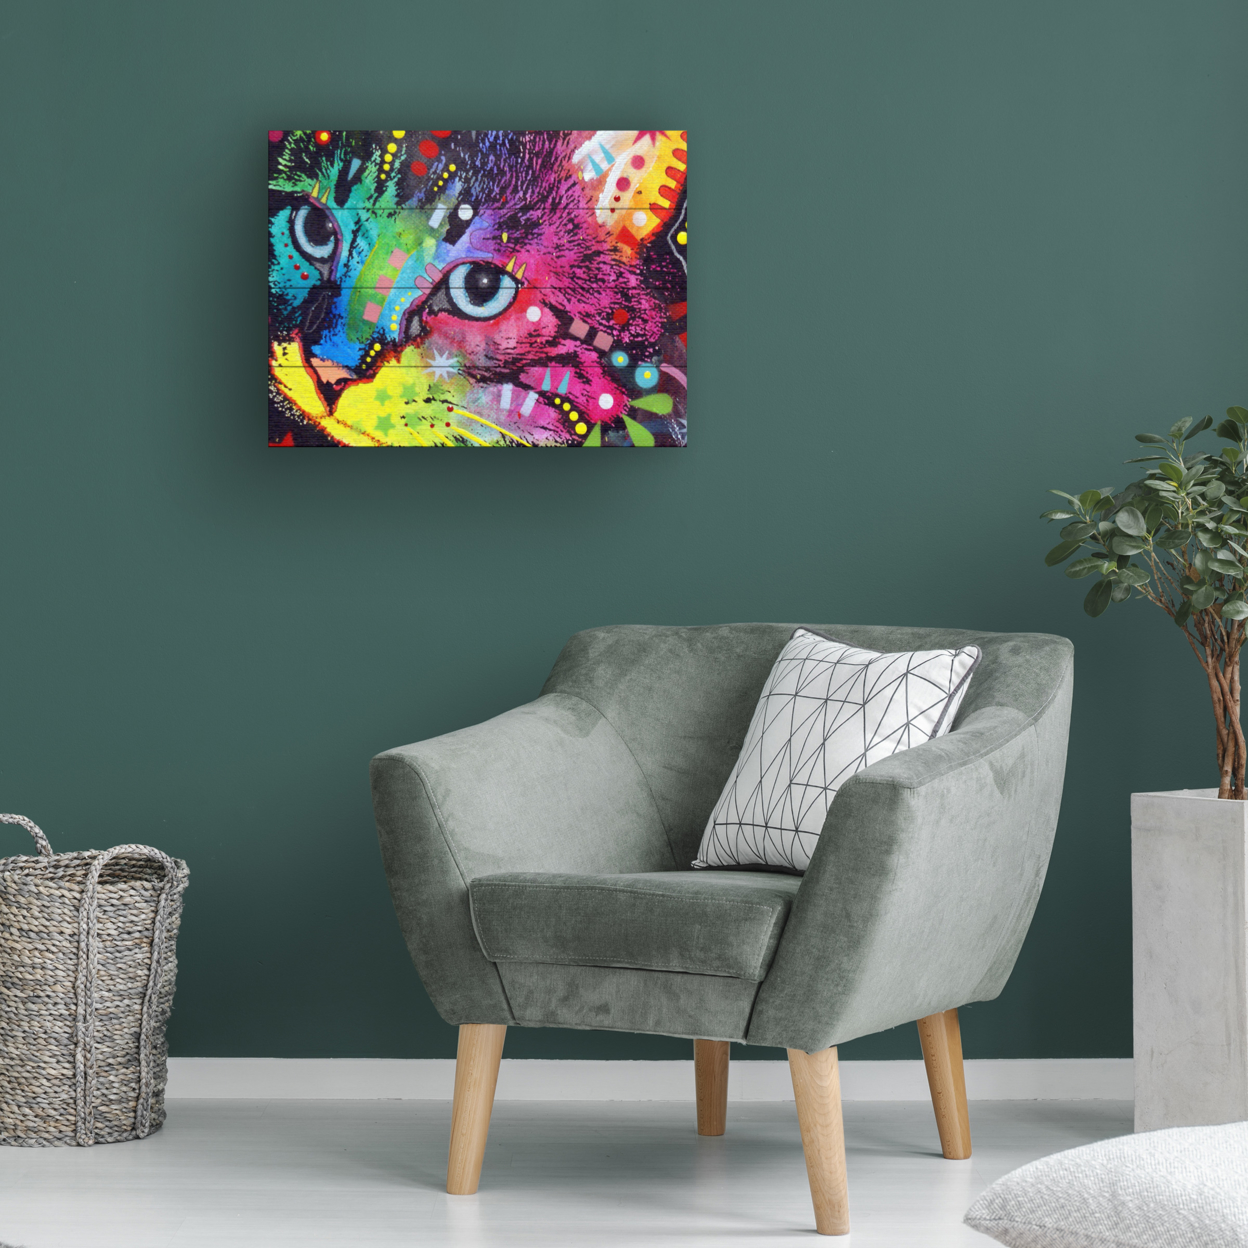 Wall Art 12 X 16 Inches Titled Thinking Cat Crowned Ready To Hang Printed On Wooden Planks